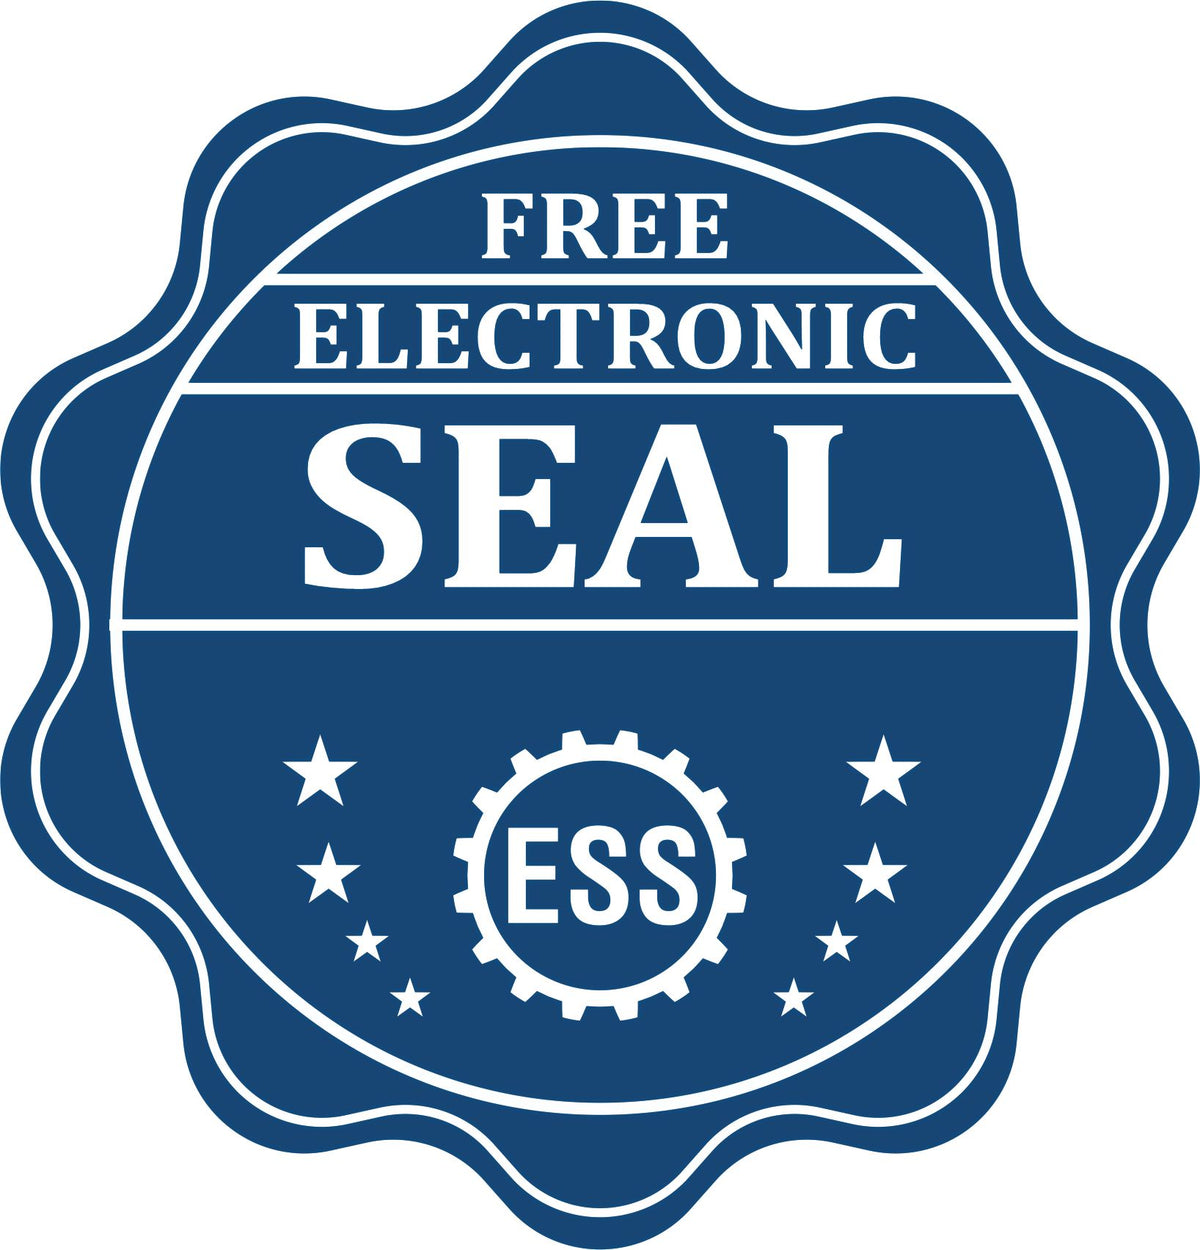 A badge showing a free electronic seal for the Handheld Michigan Professional Engineer Embosser with stars and the ESS gear on the emblem.